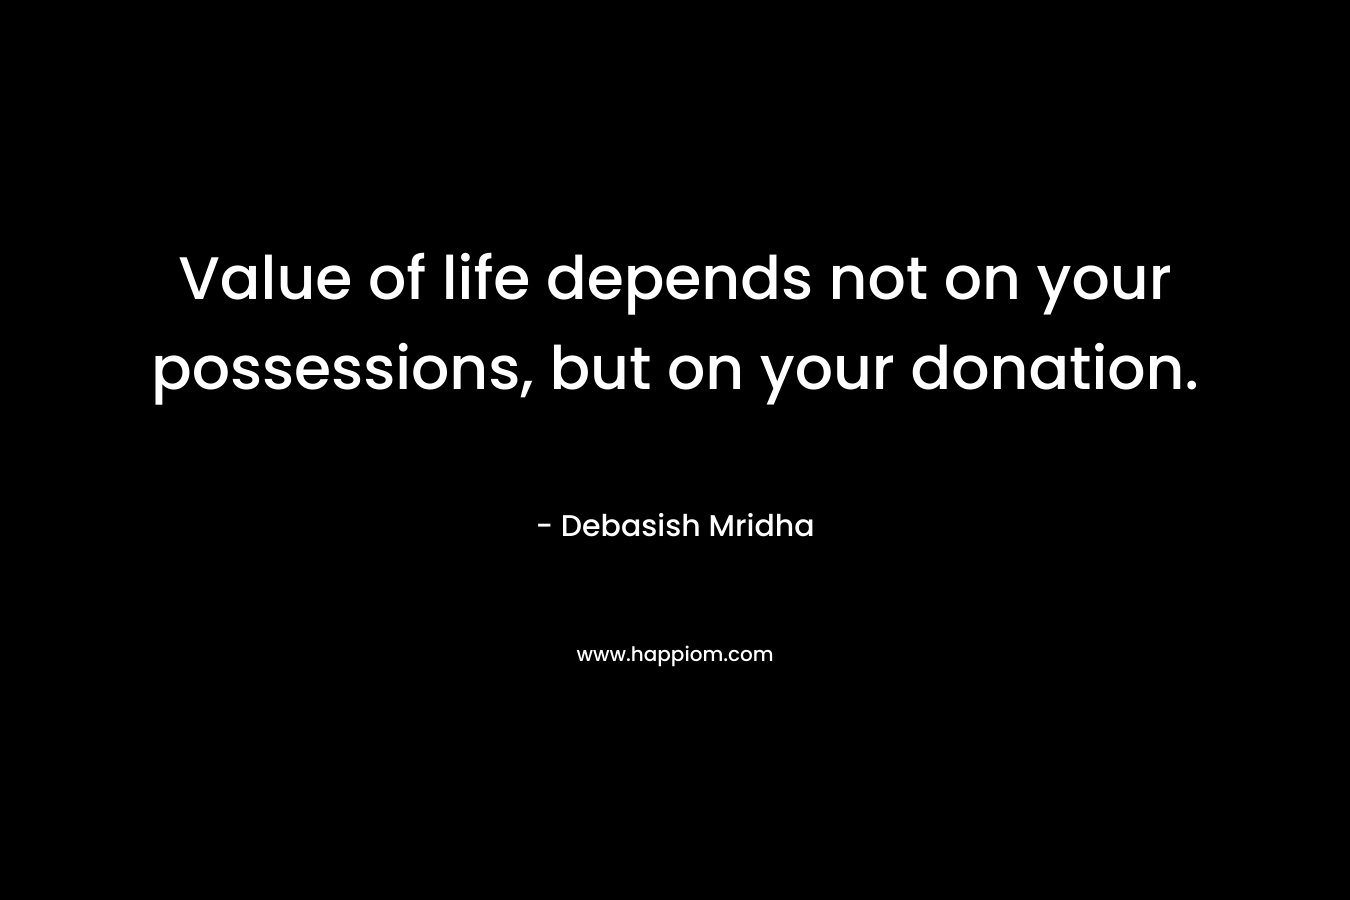 Value of life depends not on your possessions, but on your donation.